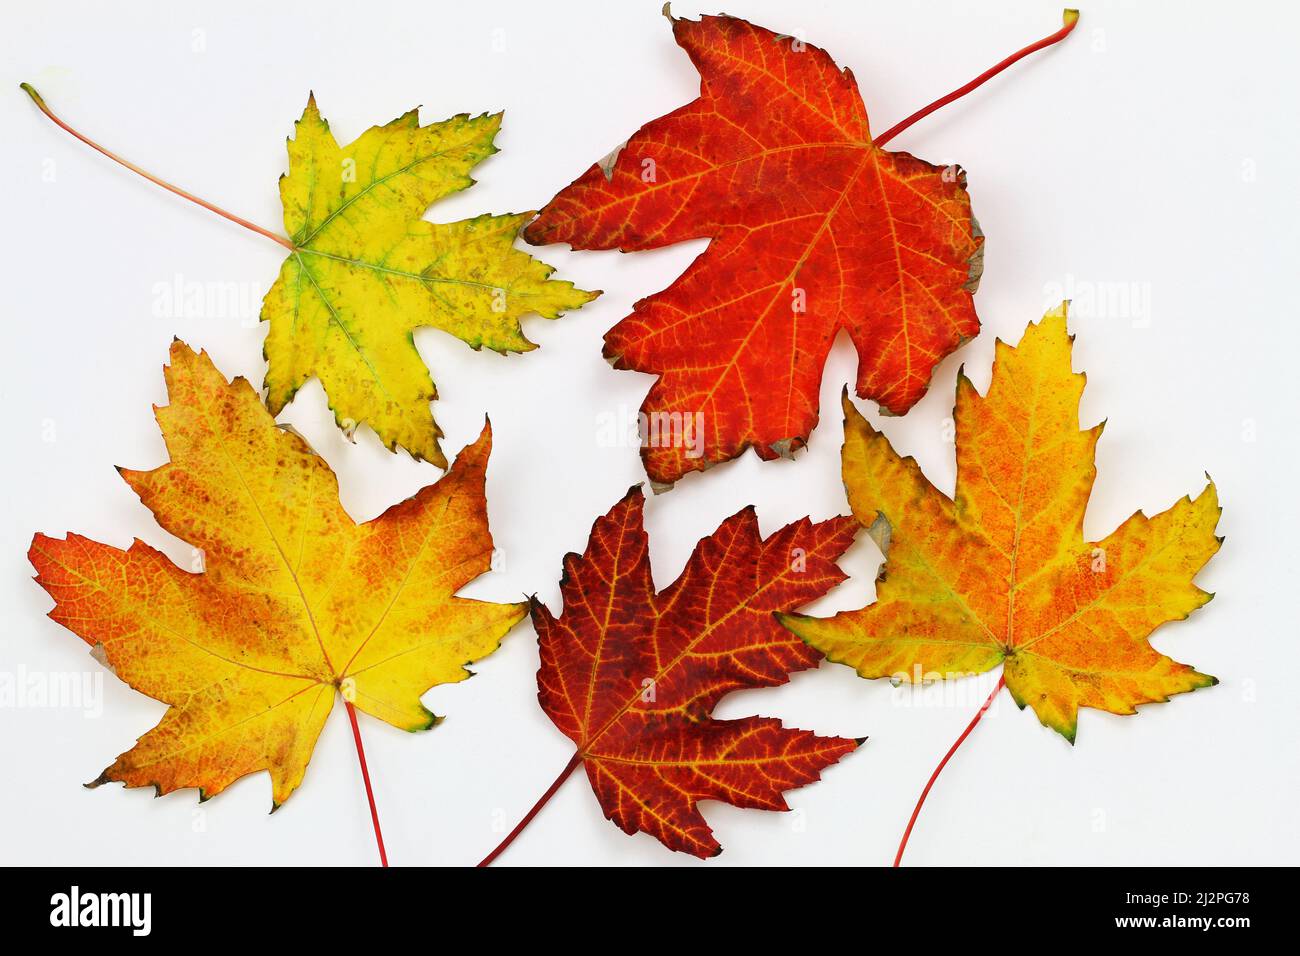 Bunch of colorful autumn maple leaves on white background Stock Photo